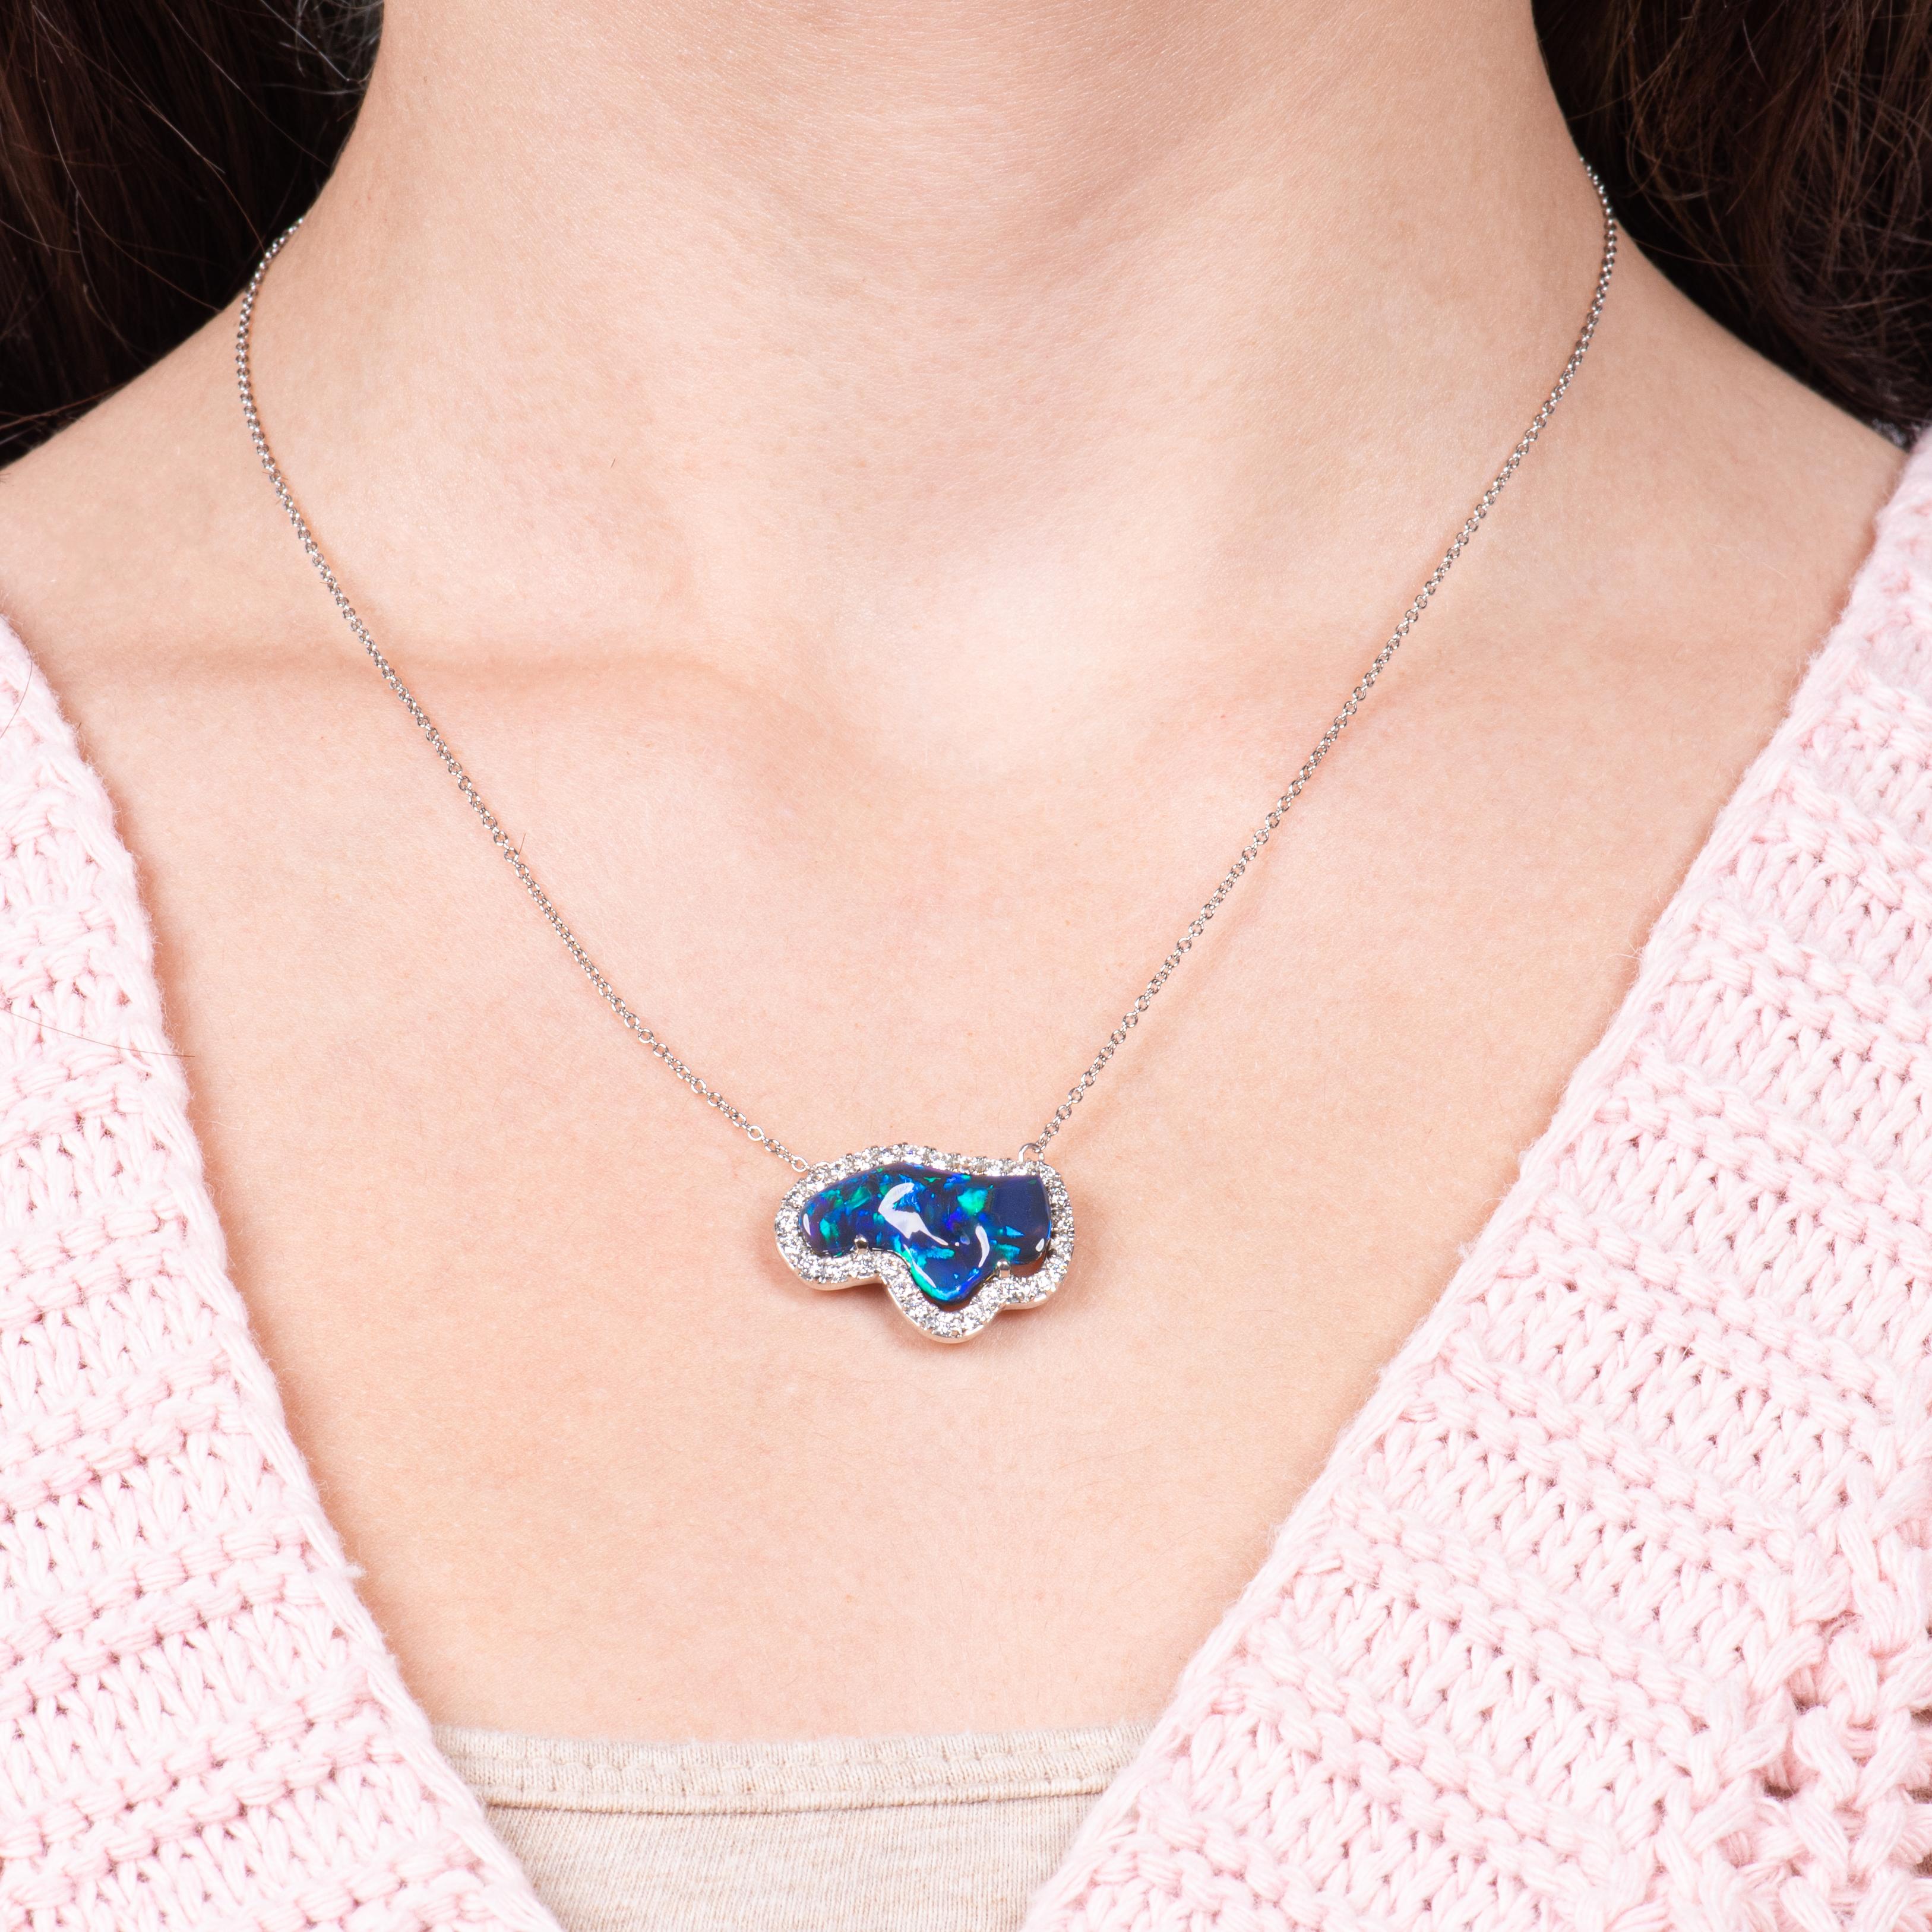 This pendant features a 5.15ct Lightning Ridge Australian opal set in a platinum necklace and accented with 1.00ctw in round cut diamonds forming the halo.